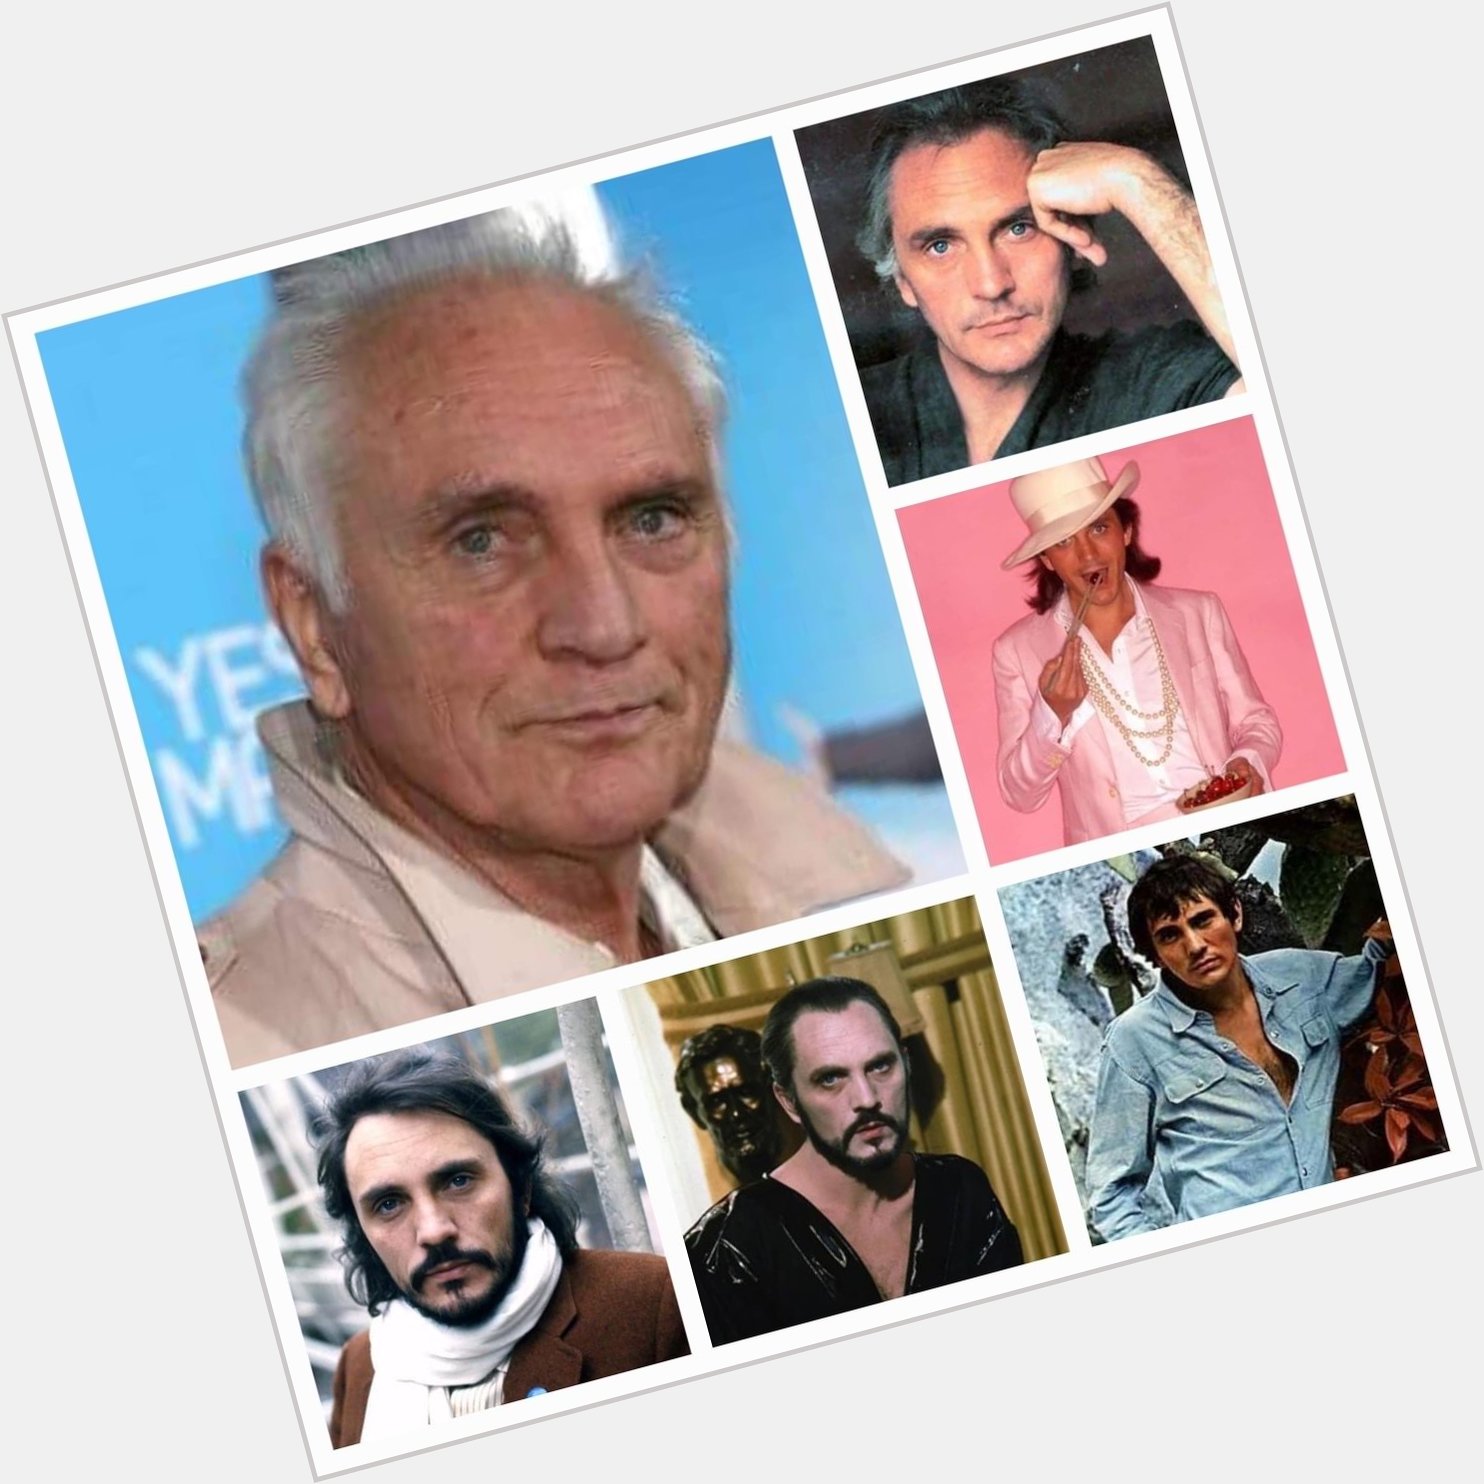 Happy 84th birthday Terence Stamp! The British icon and legend. 